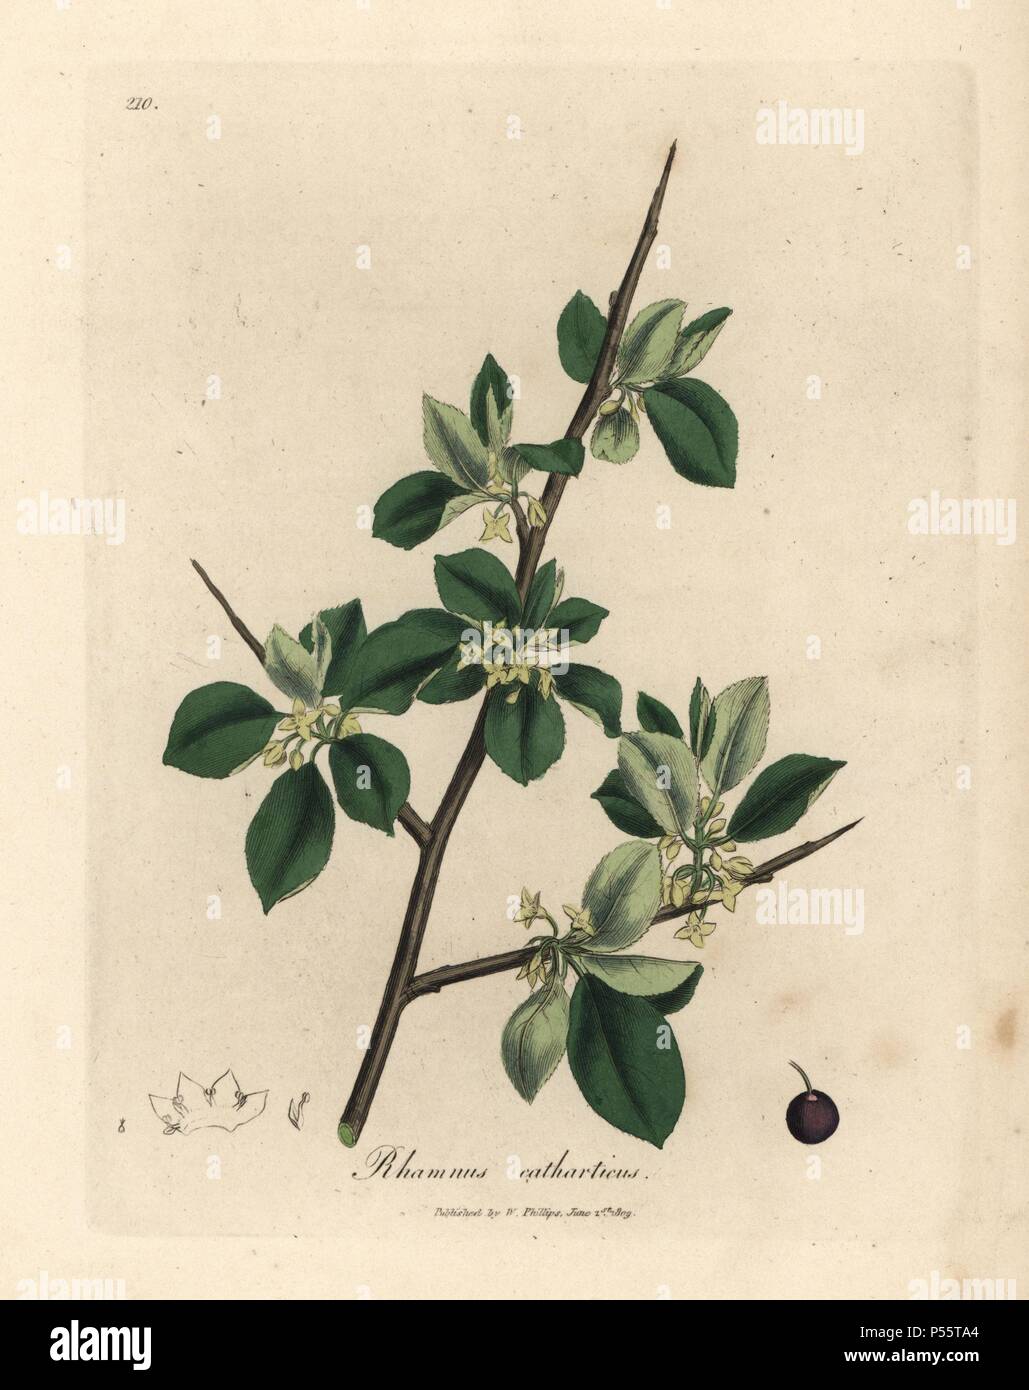 Purging buckthorn, Rhamnus catharticus. Handcoloured copperplate engraving from a botanical illustration by James Sowerby from William Woodville and Sir William Jackson Hooker's 'Medical Botany,' John Bohn, London, 1832. The tireless Sowerby (1757-1822) drew over 2, 500 plants for Smith's mammoth 'English Botany' (1790-1814) and 440 mushrooms for 'Coloured Figures of English Fungi ' (1797) among many other works. Stock Photo